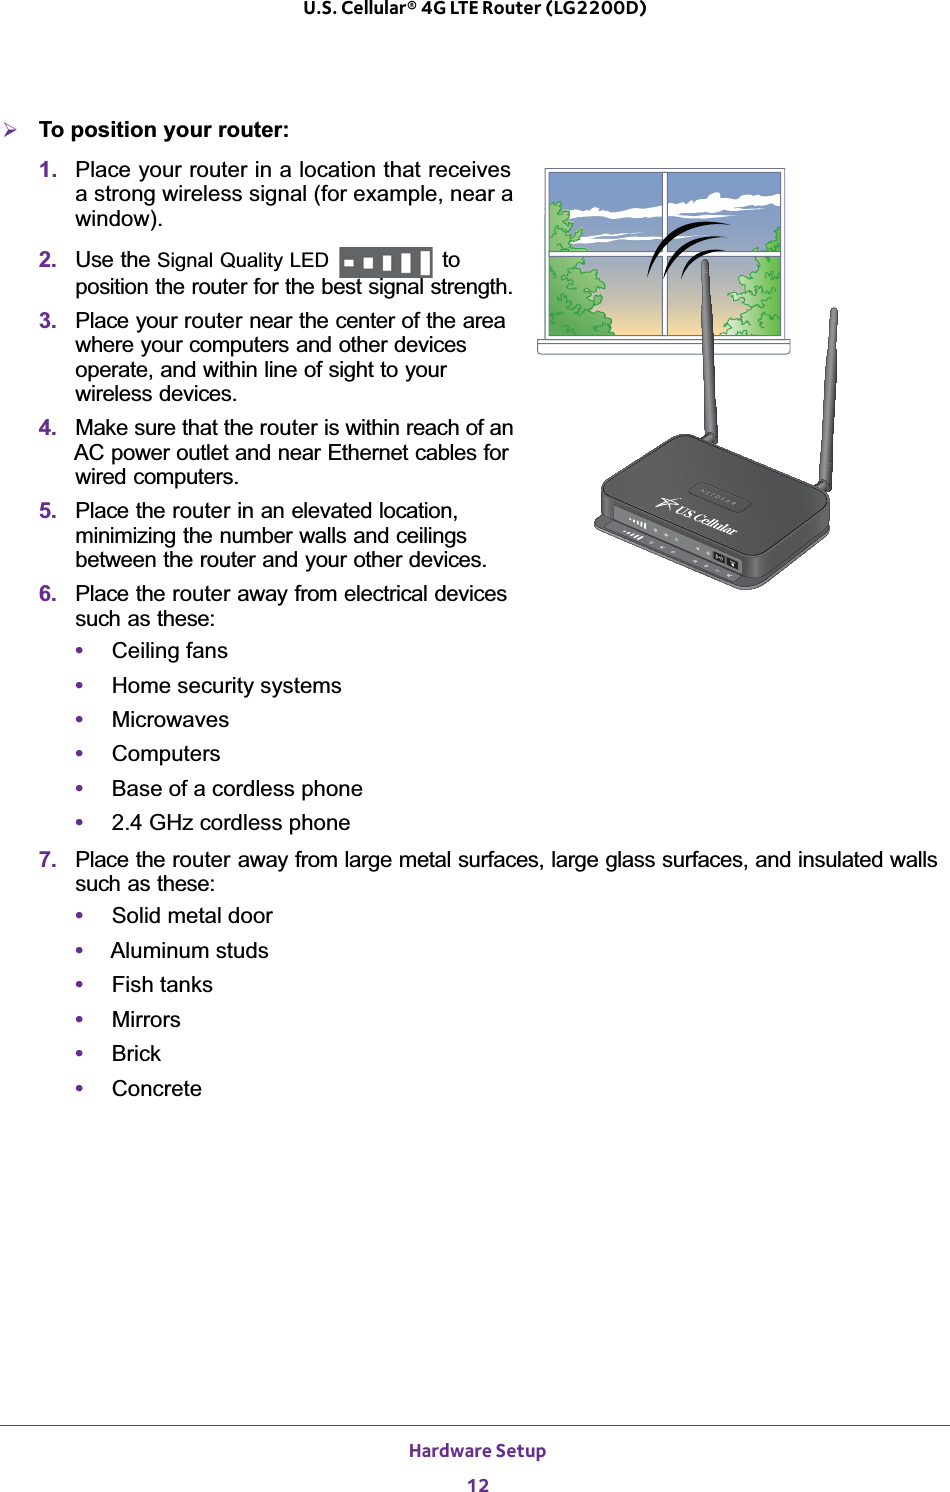 Hardware Setup12U.S. Cellular® 4G LTE Router (LG2200D) ¾To position your router:1. Place your router in a location that receives a strong wireless signal (for example, near a window).2. Use the Signal Quality LED   to position the router for the best signal strength. 3. Place your router near the center of the area where your computers and other devices operate, and within line of sight to your wireless devices.4. Make sure that the router is within reach of an AC power outlet and near Ethernet cables for wired computers.5. Place the router in an elevated location, minimizing the number walls and ceilings between the router and your other devices.6. Place the router away from electrical devices such as these:•Ceiling fans•Home security systems•Microwaves•Computers•Base of a cordless phone•2.4 GHz cordless phone7. Place the router away from large metal surfaces, large glass surfaces, and insulated walls such as these:•Solid metal door•Aluminum studs•Fish tanks•Mirrors•Brick•Concrete